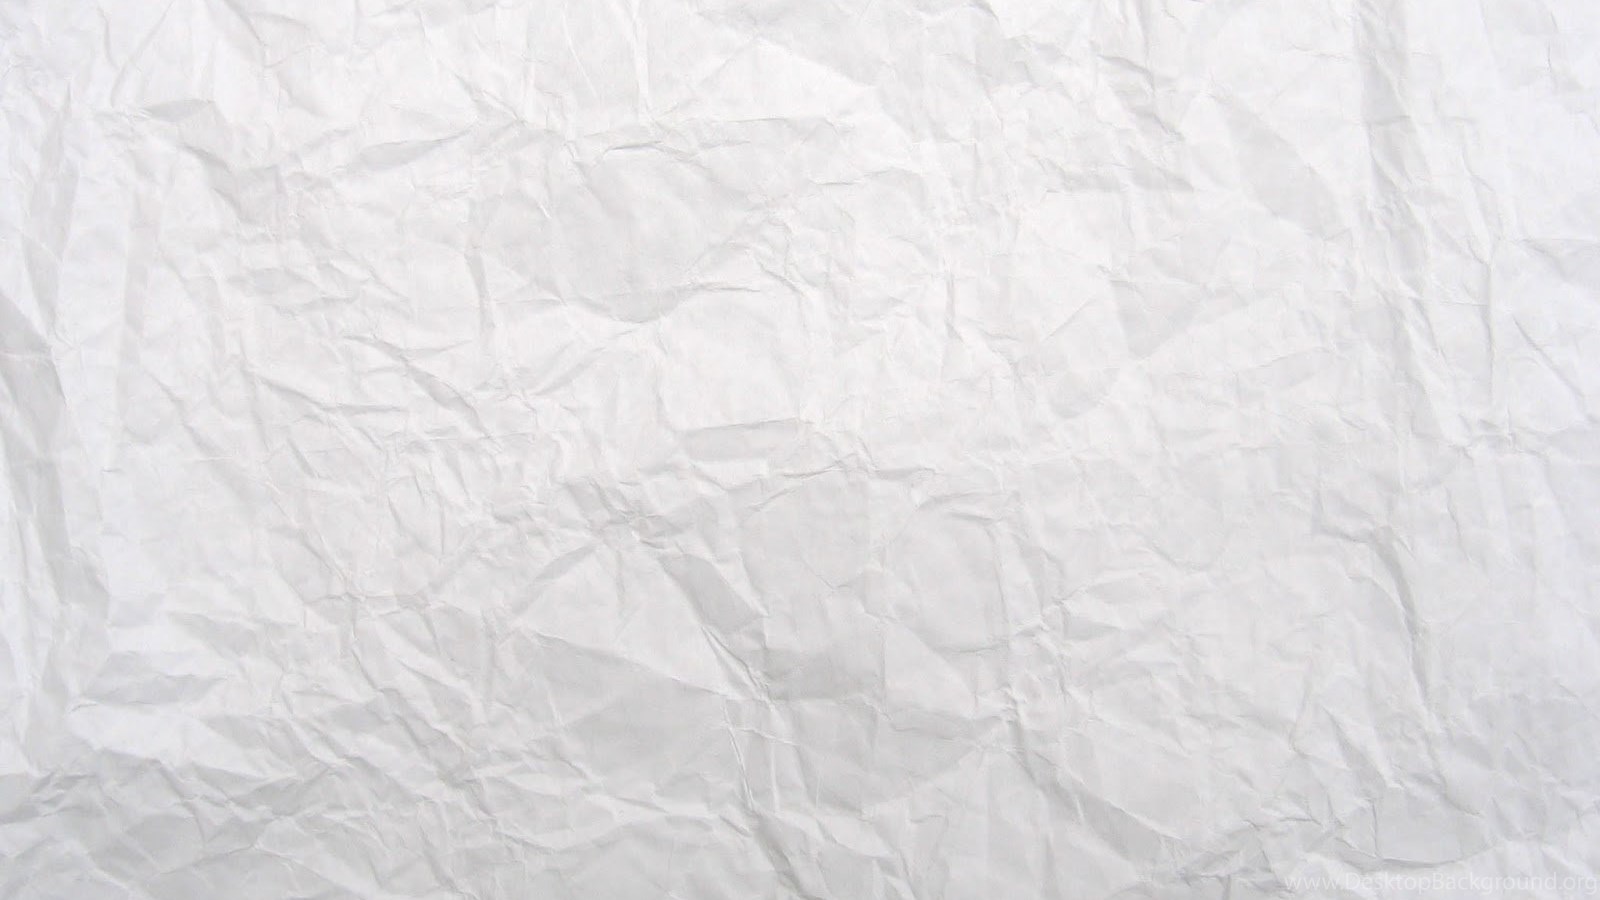 Free Download Wallpaper Crumpled White Paper Texture Hd Wallpapers Desktop Background